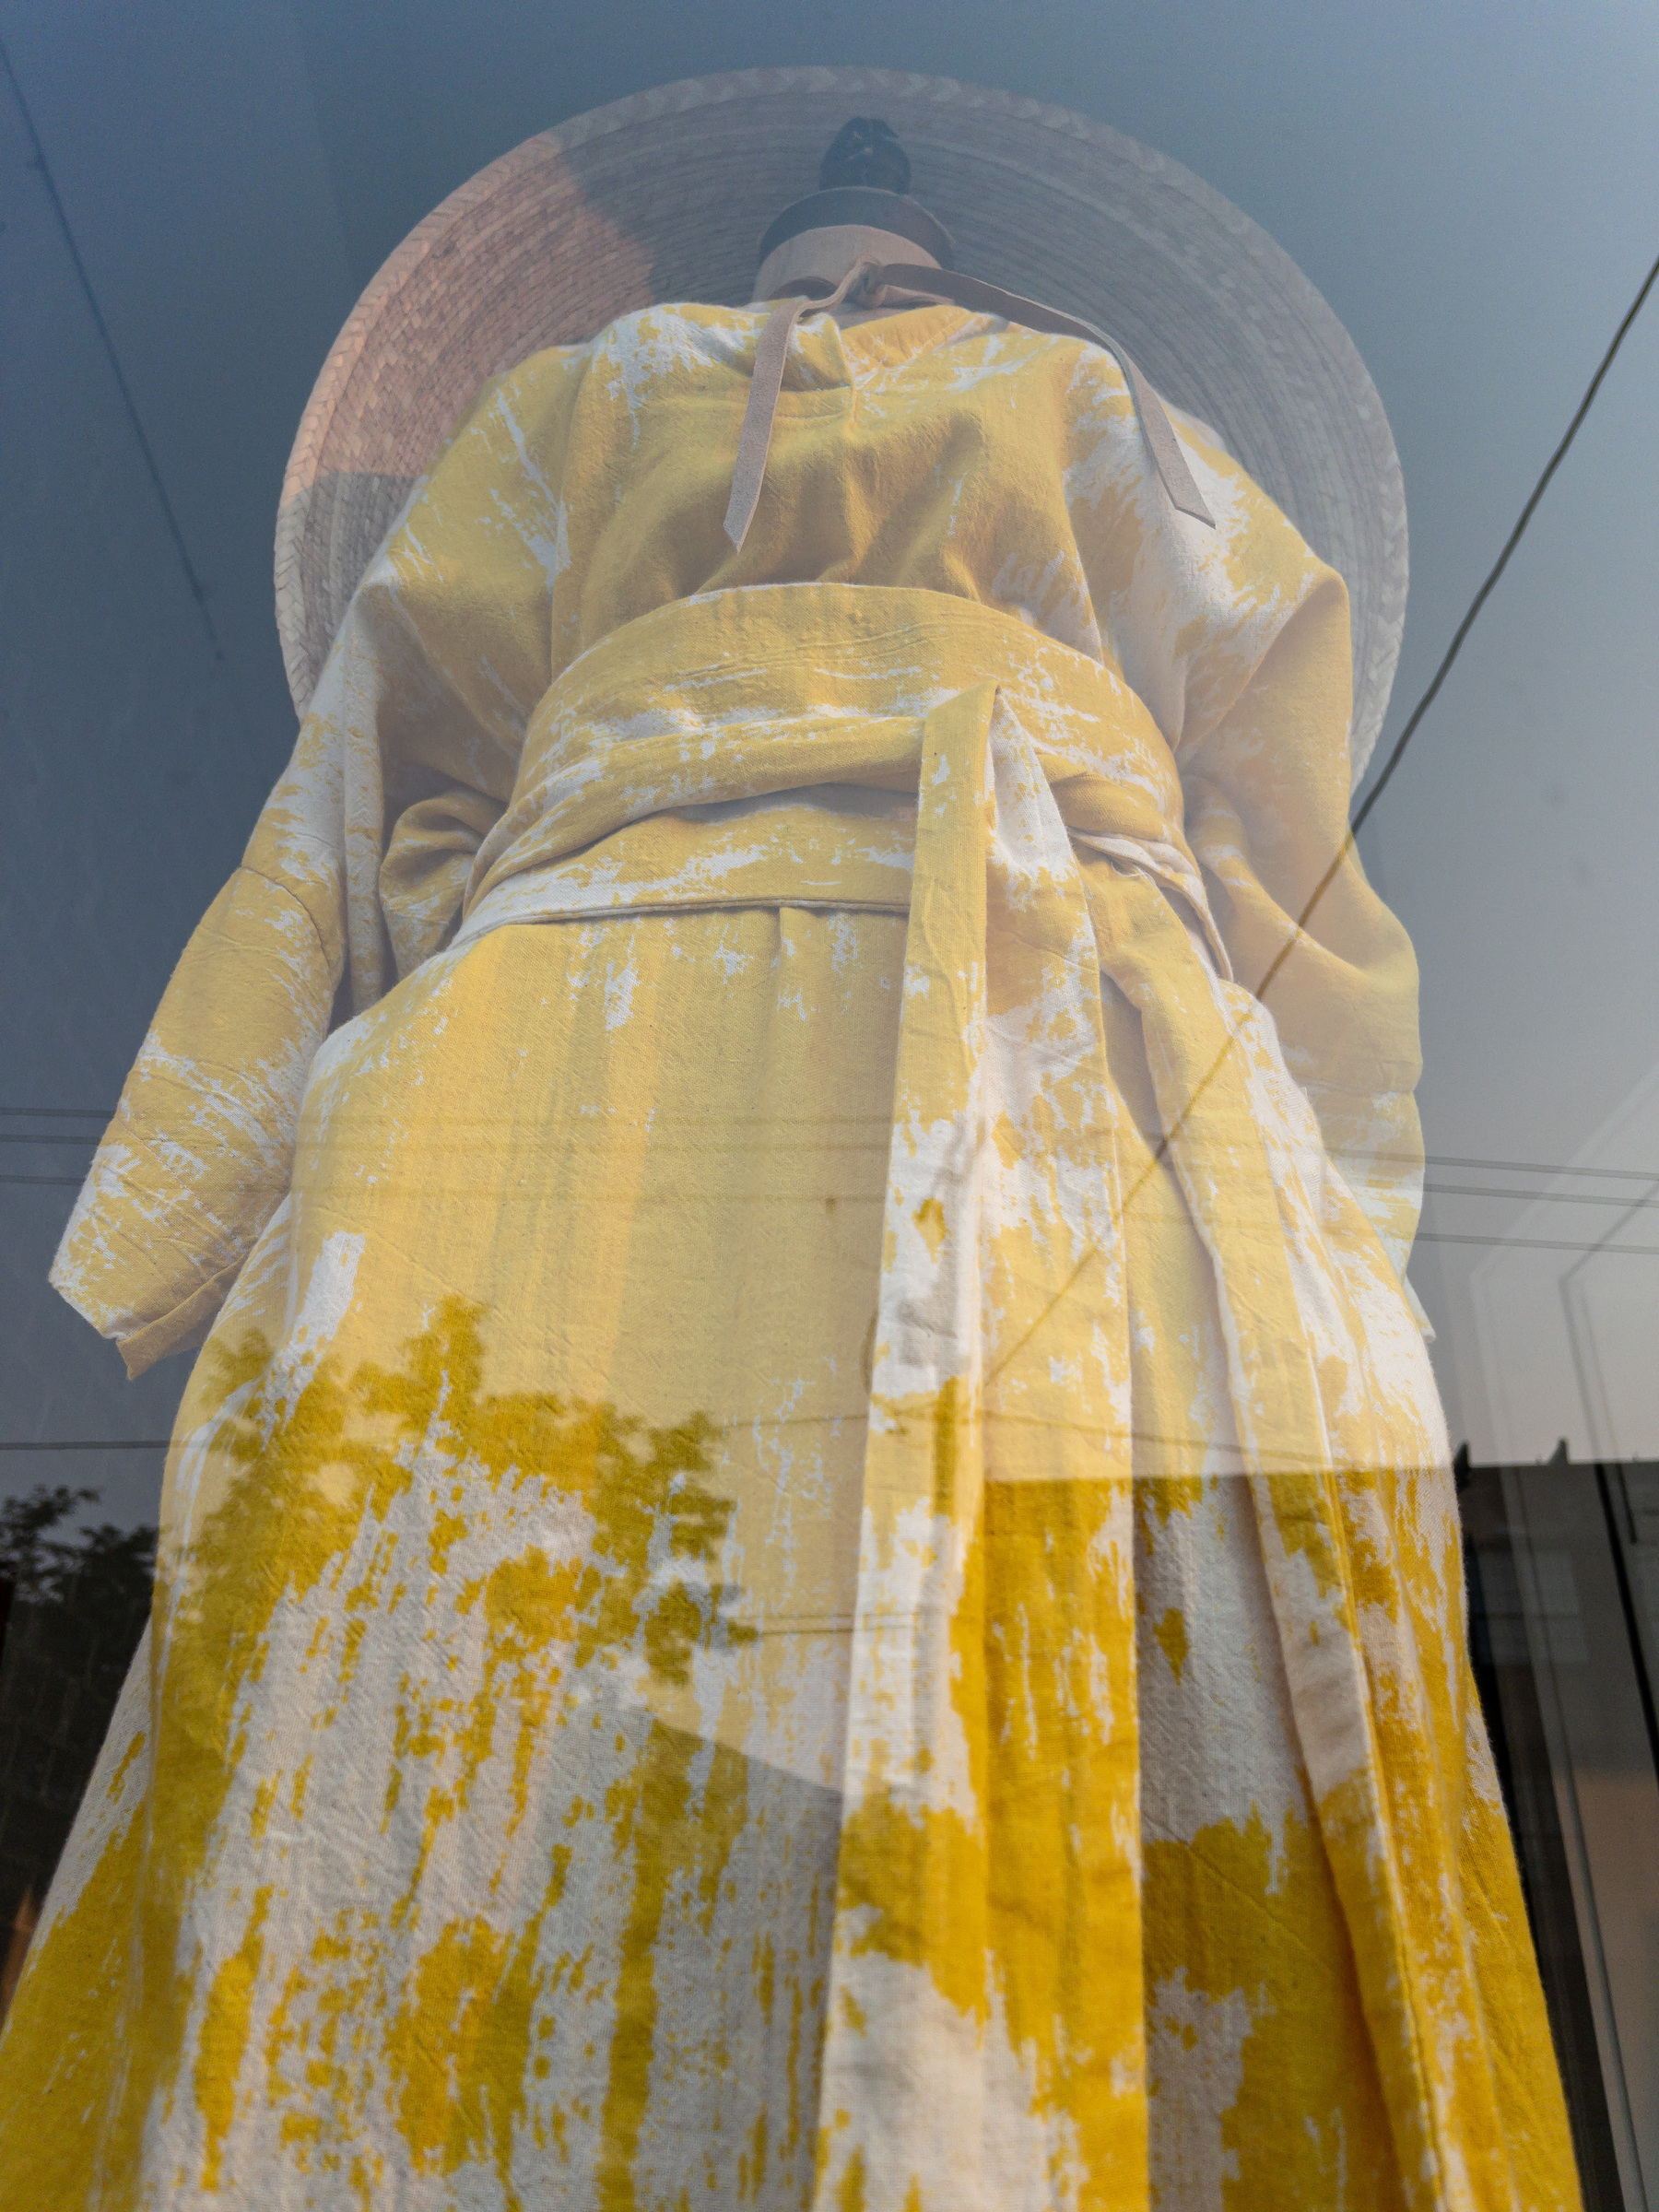 Yellow floral print dress, with sash at the waist, on a mannequin, with broad brimmed straw hat on top.